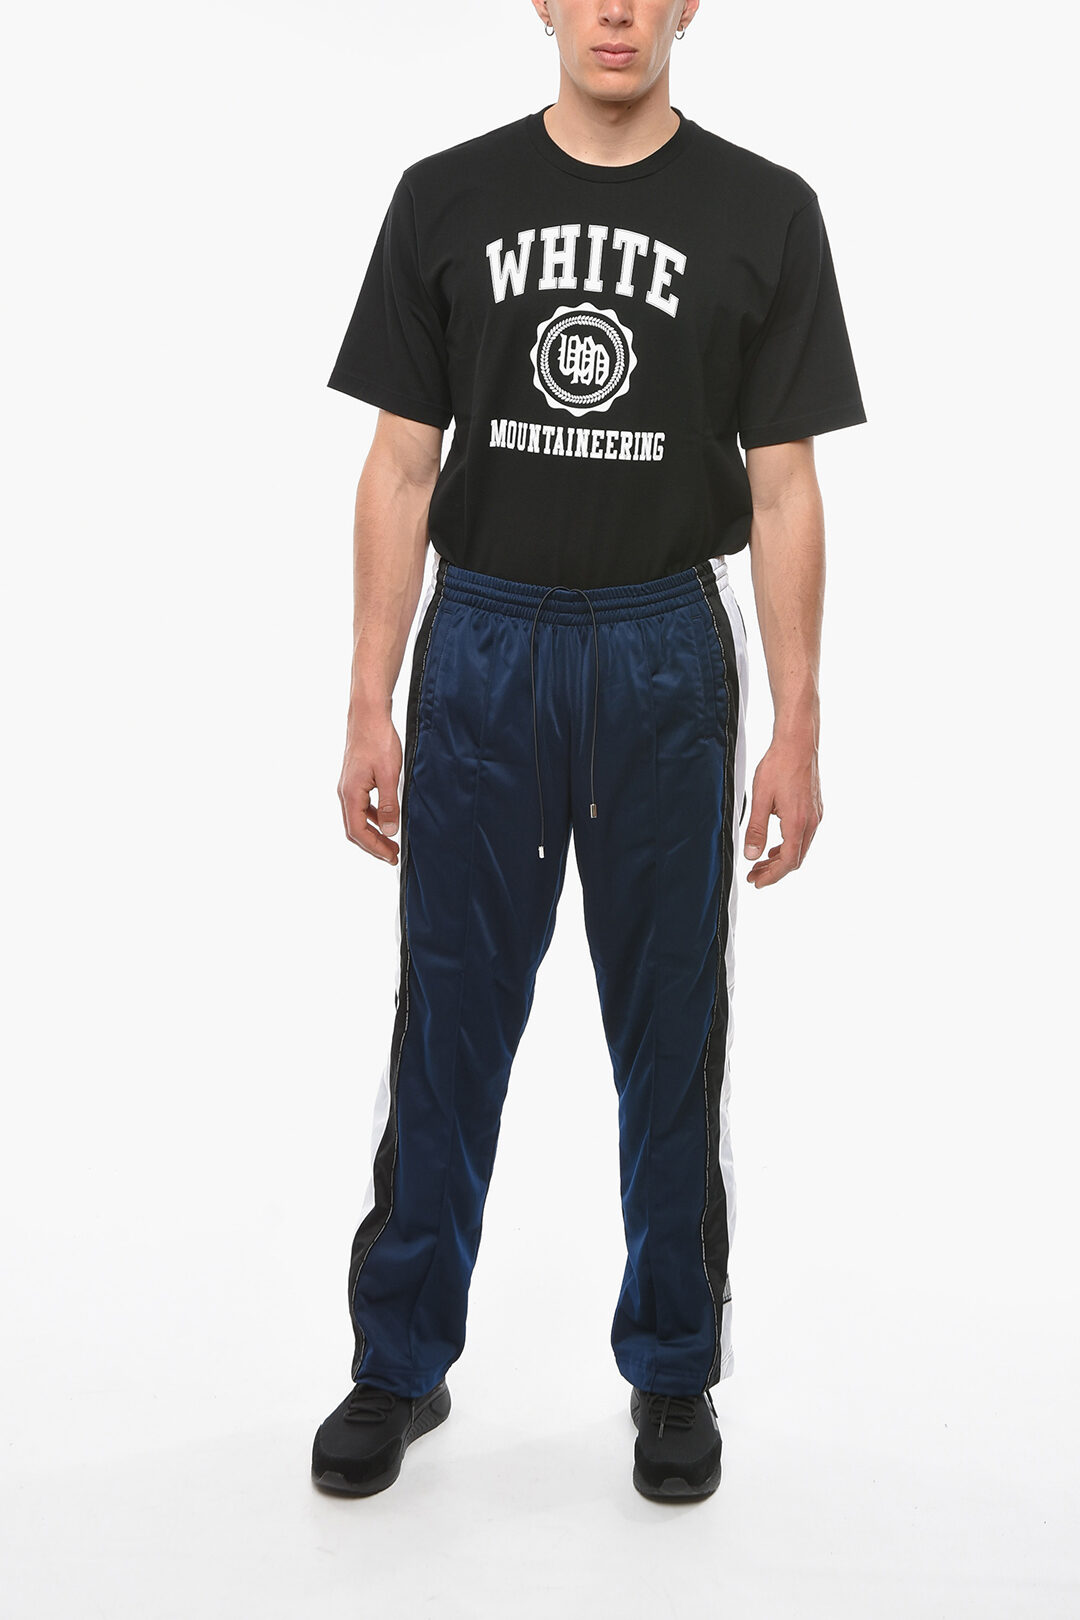 Vetements VTMNTS Contrasting Band SNAP Jersey Sweatpants with Snap Buttons  men - Glamood Outlet